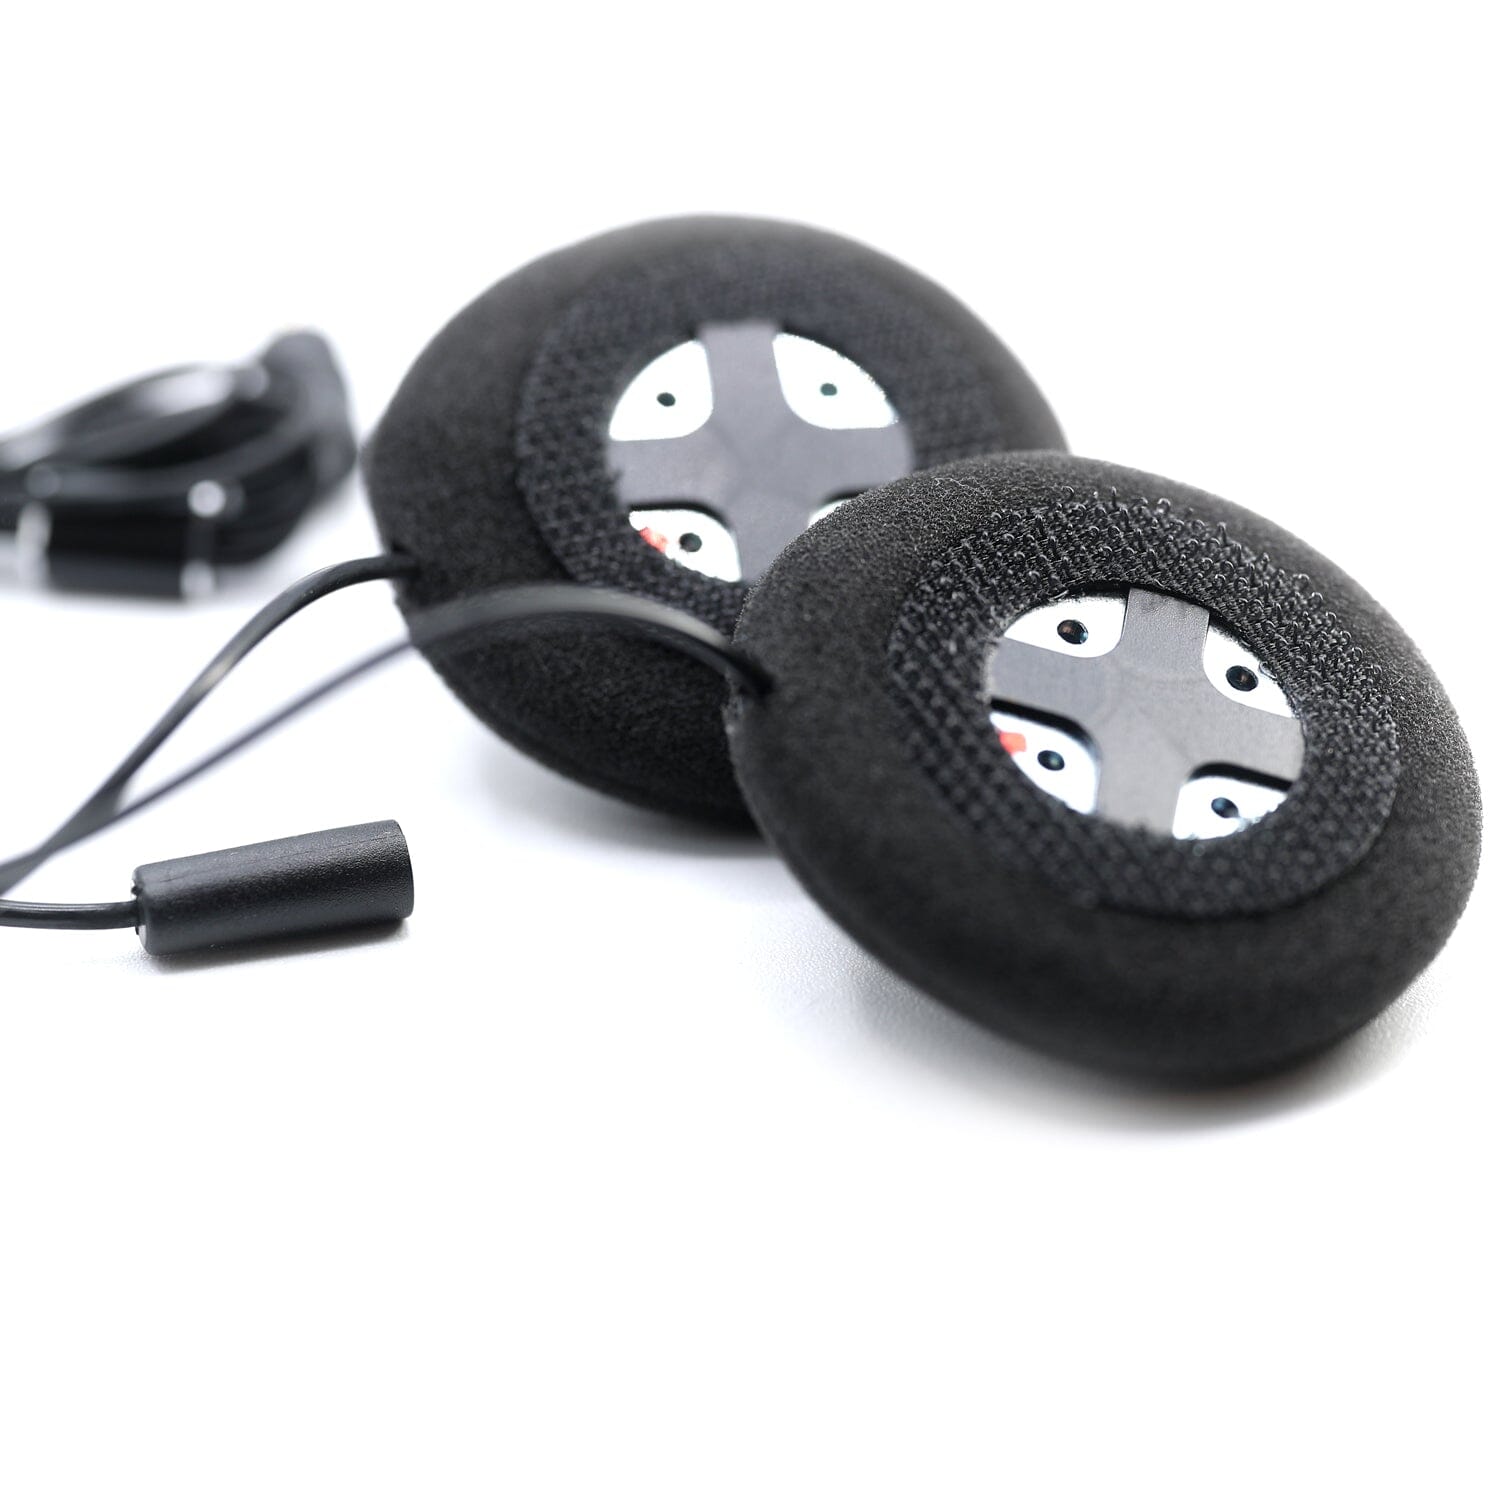 Replacement Speakers for BT2 Bluetooth Headset